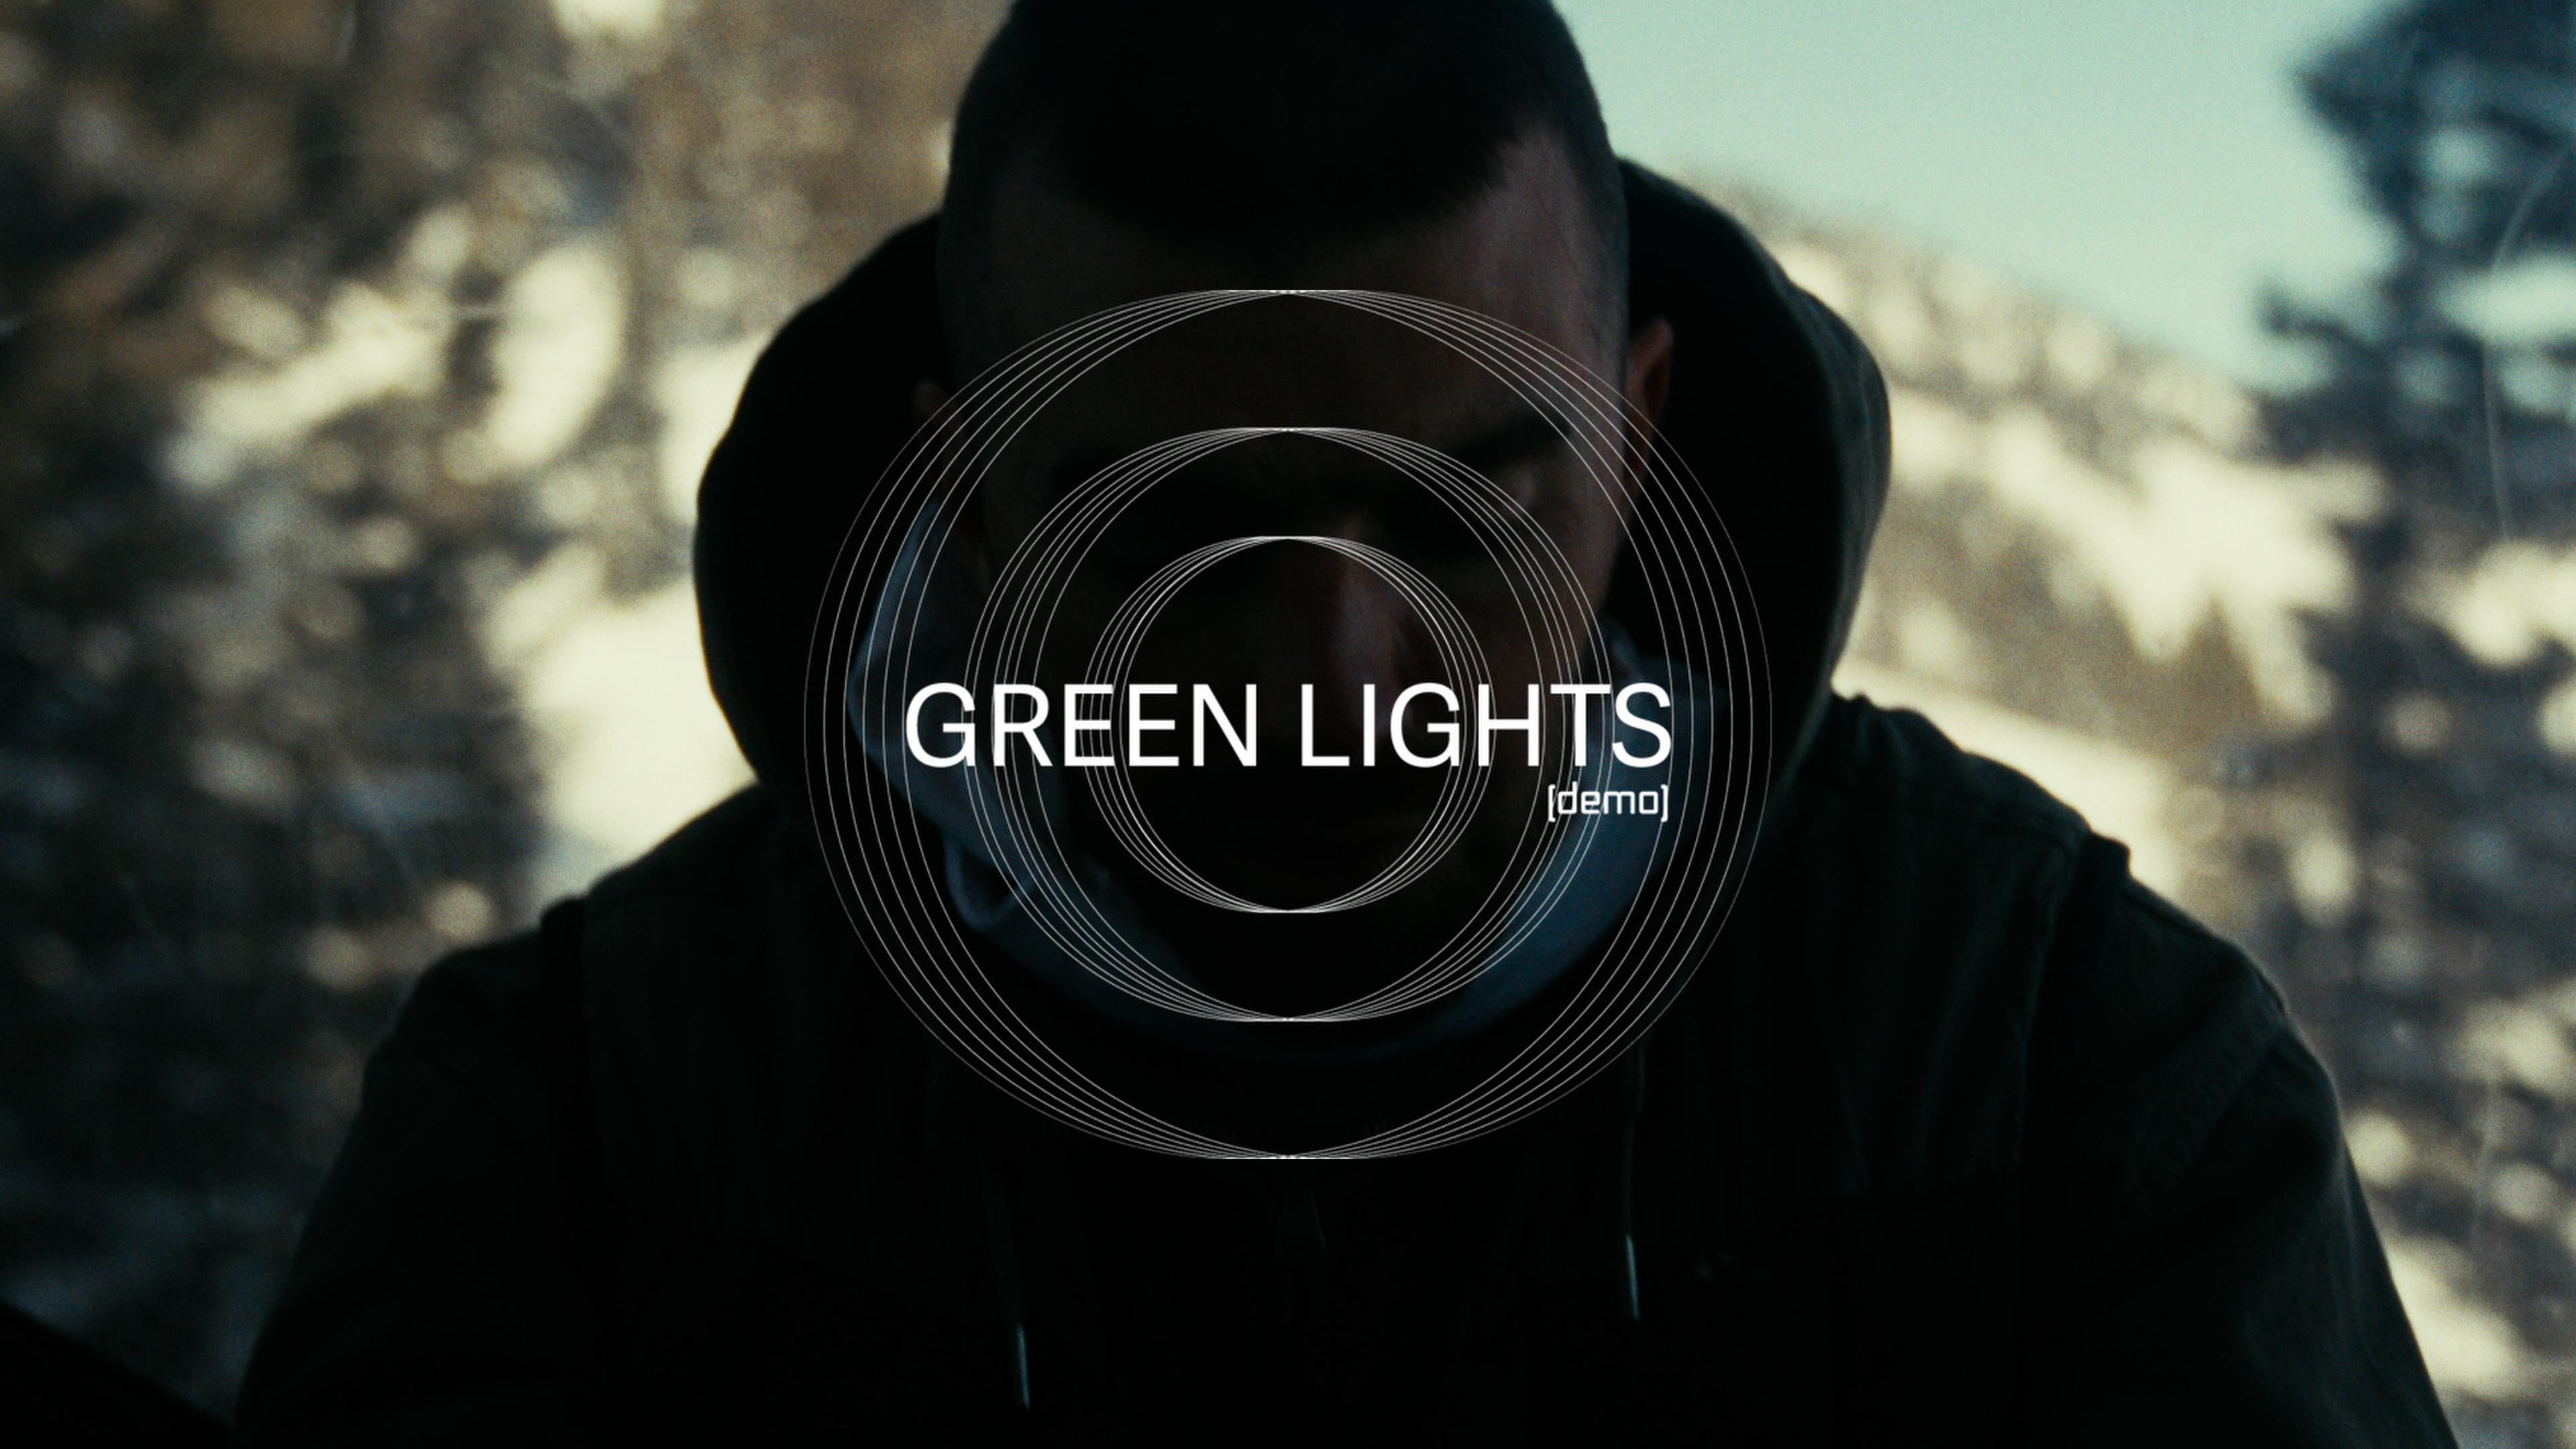 The Chainsmokers - Green Lights (demo - Official Video)